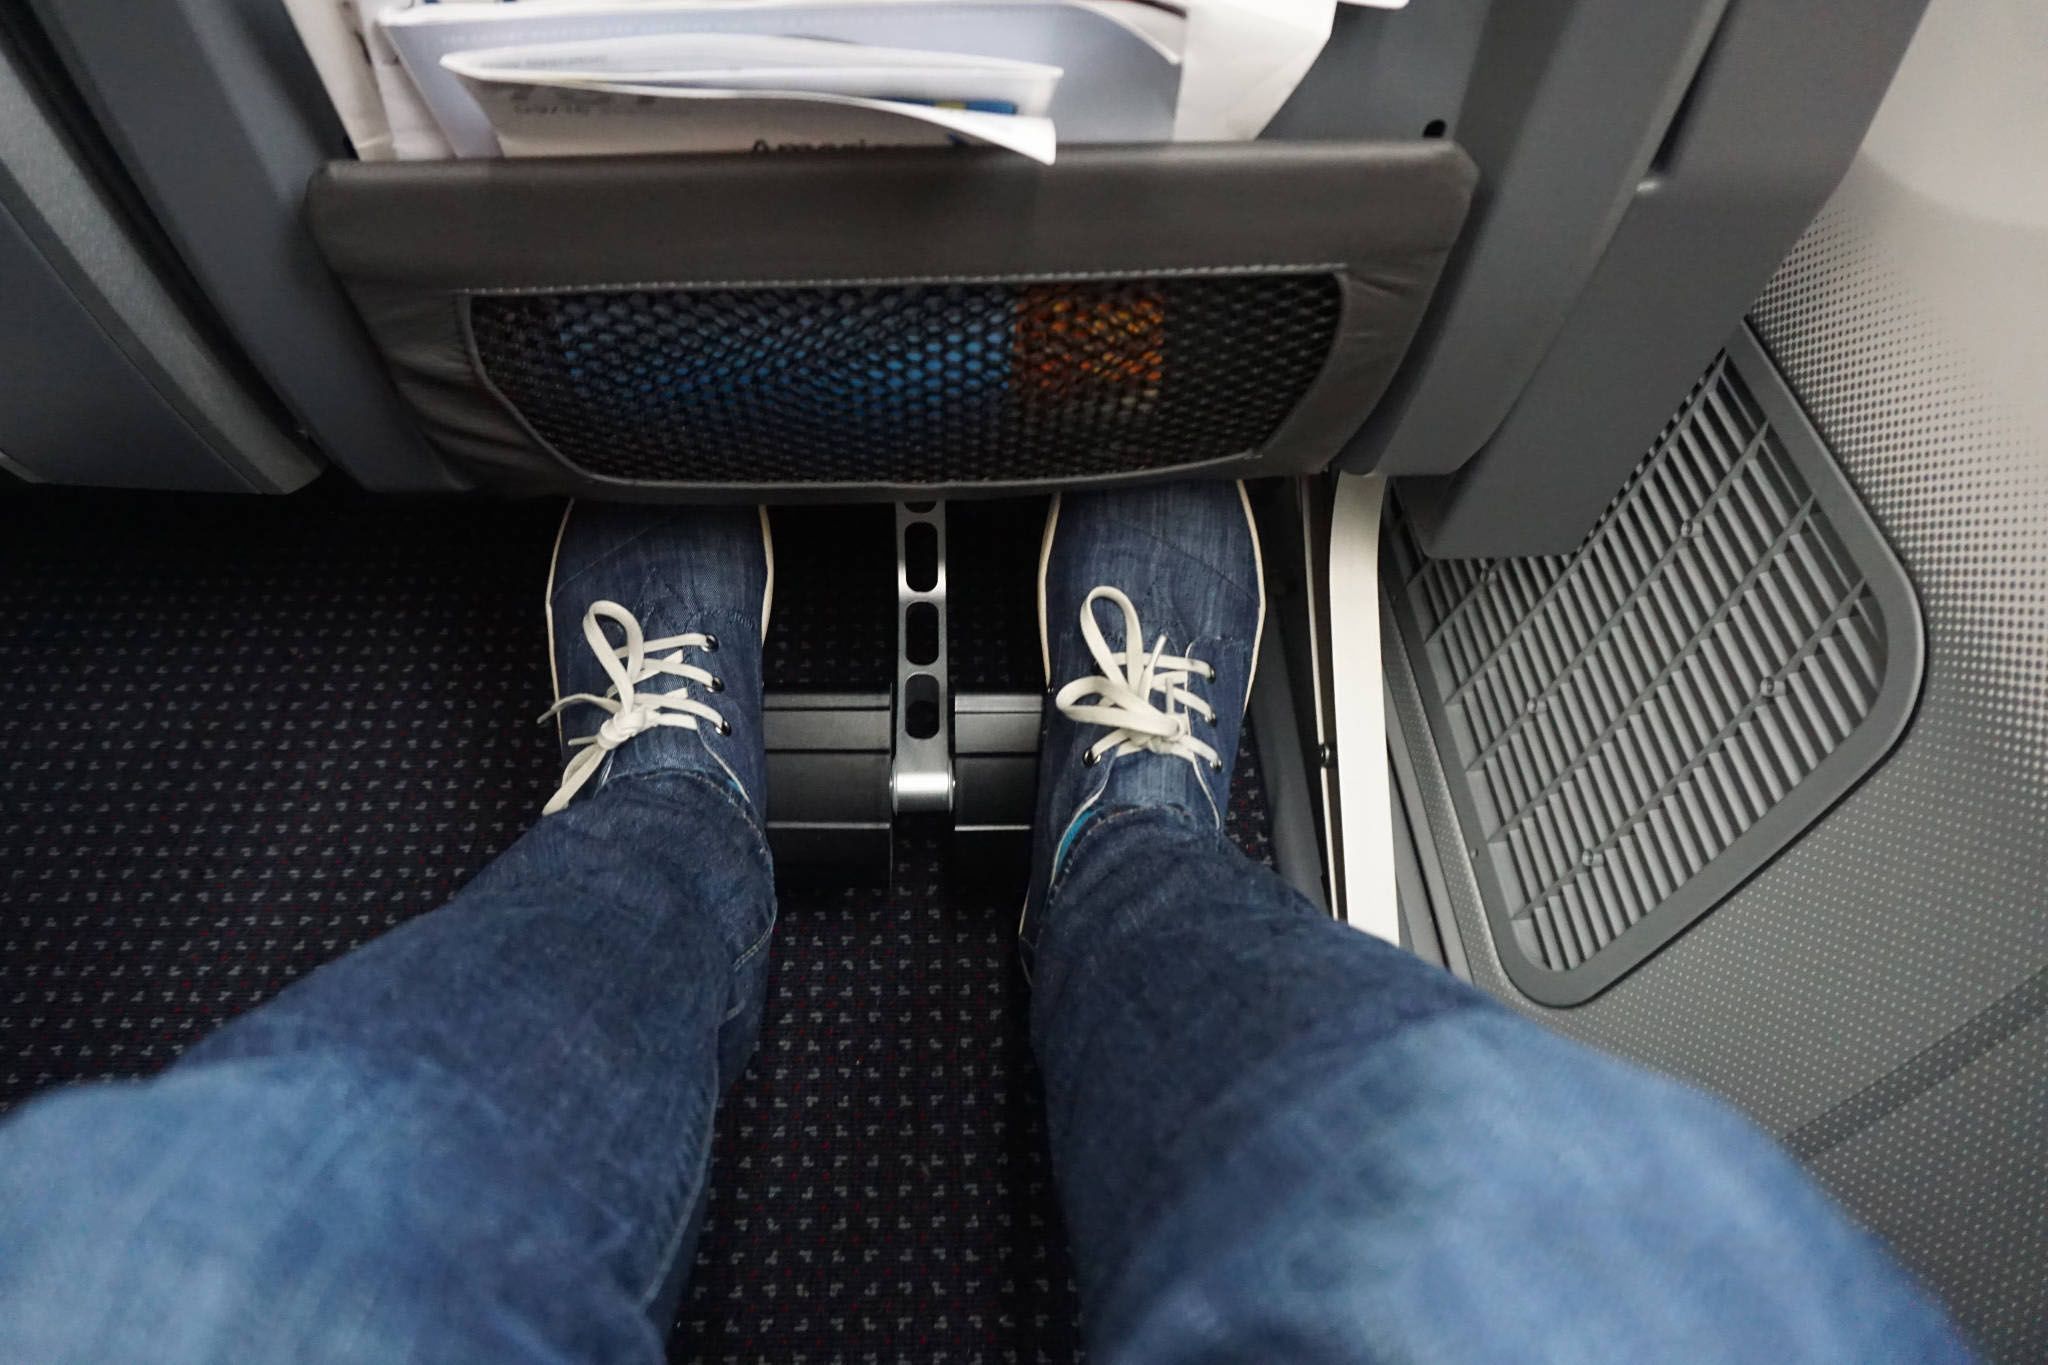 Feet with not a lot of room in Premium economy